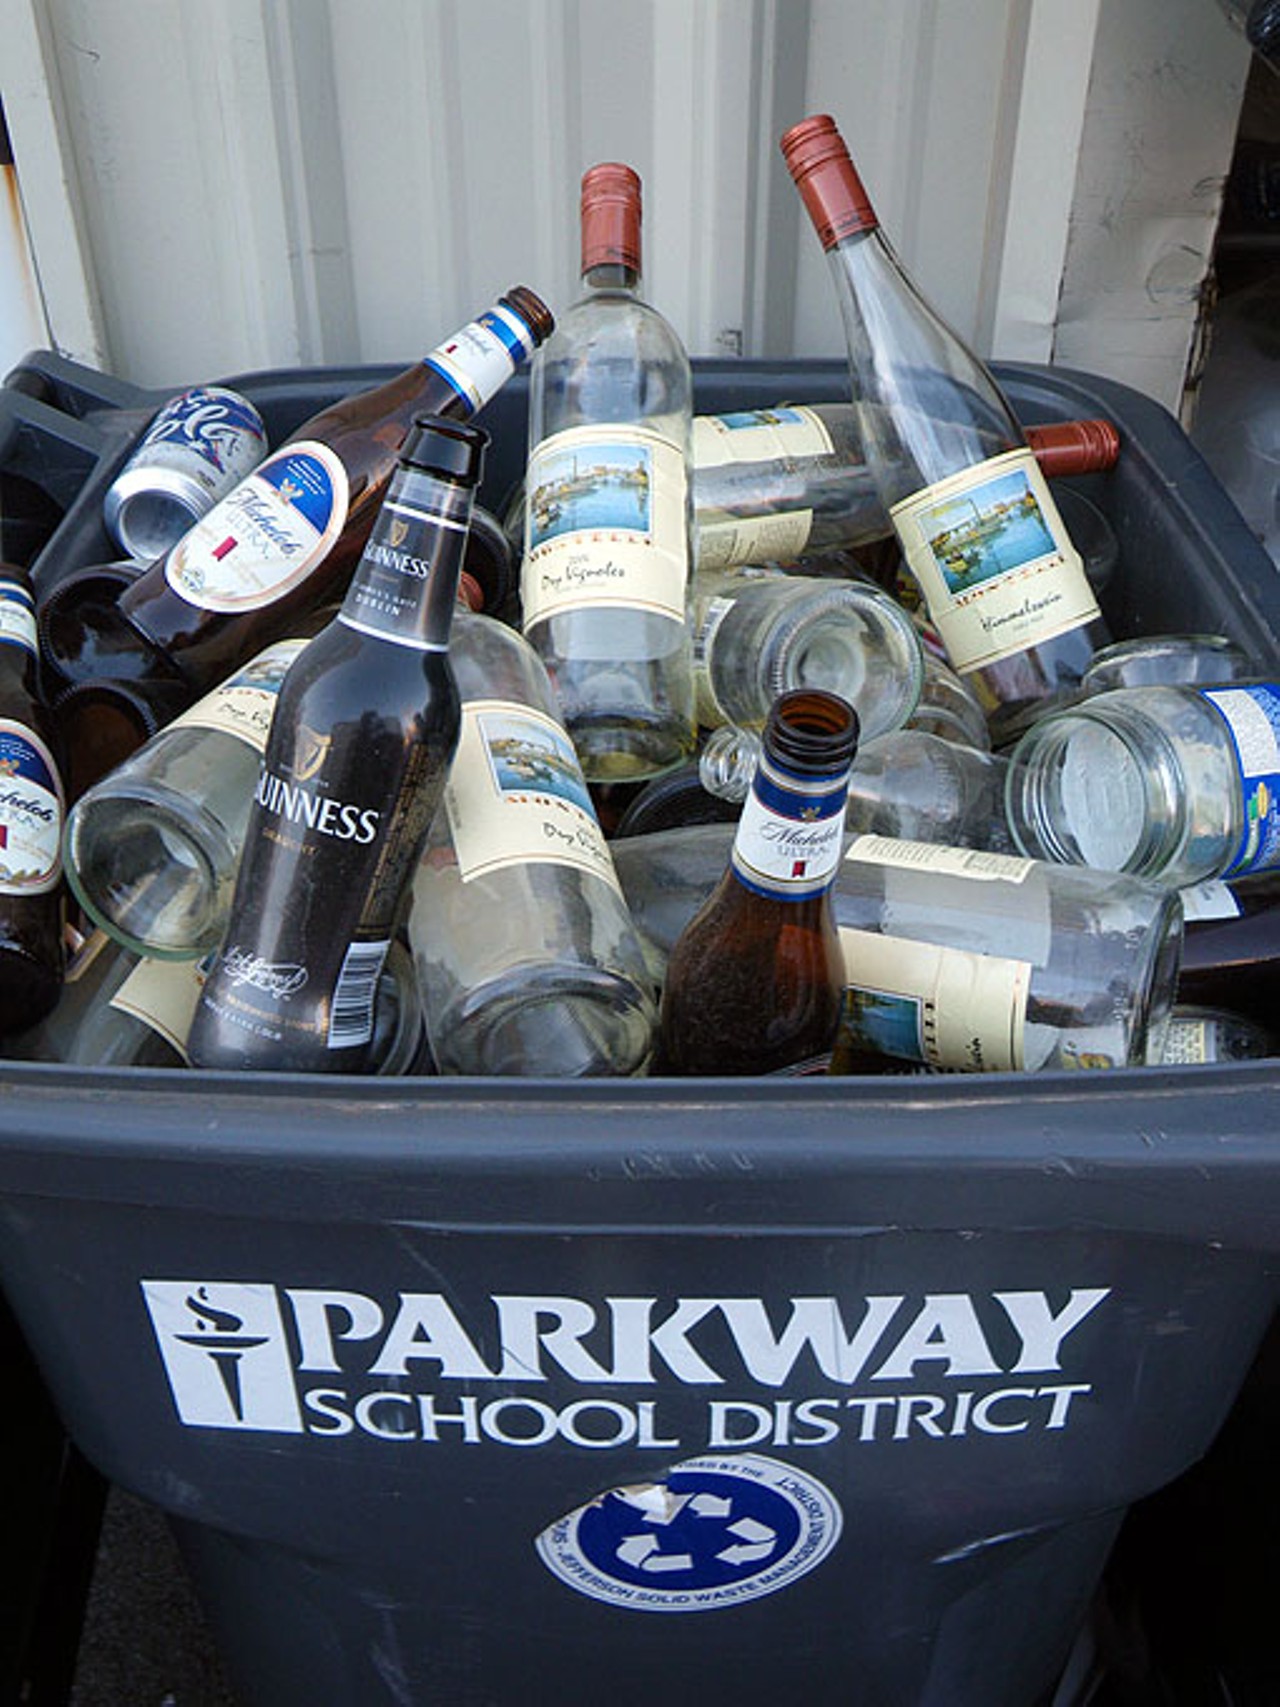 The Parkway School District currently recycles waste from its 33 buildings. Green Trails residents say this picture shows that Parkway also accepts recyclables from other entities. The manager of the site says the district has stopped the practice within the last several months.